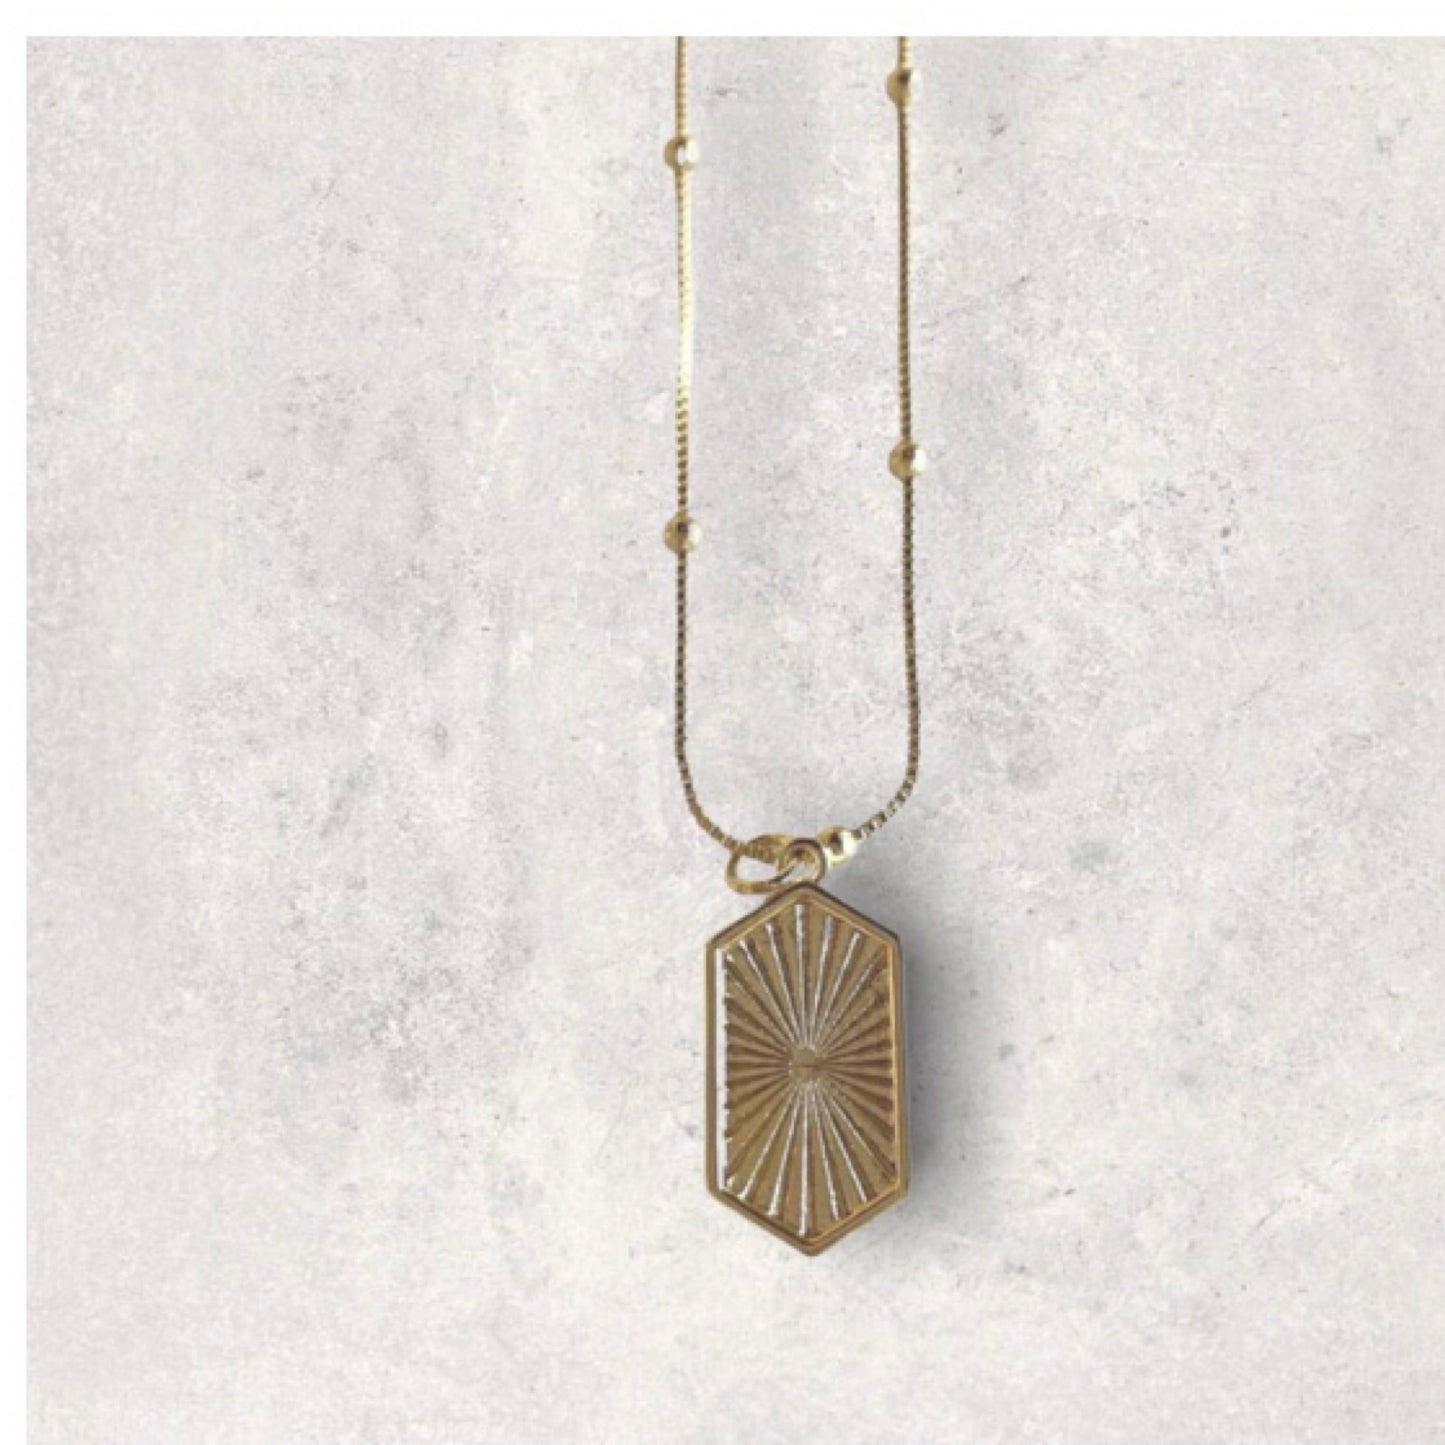 Lock + Loring Dayna Necklace